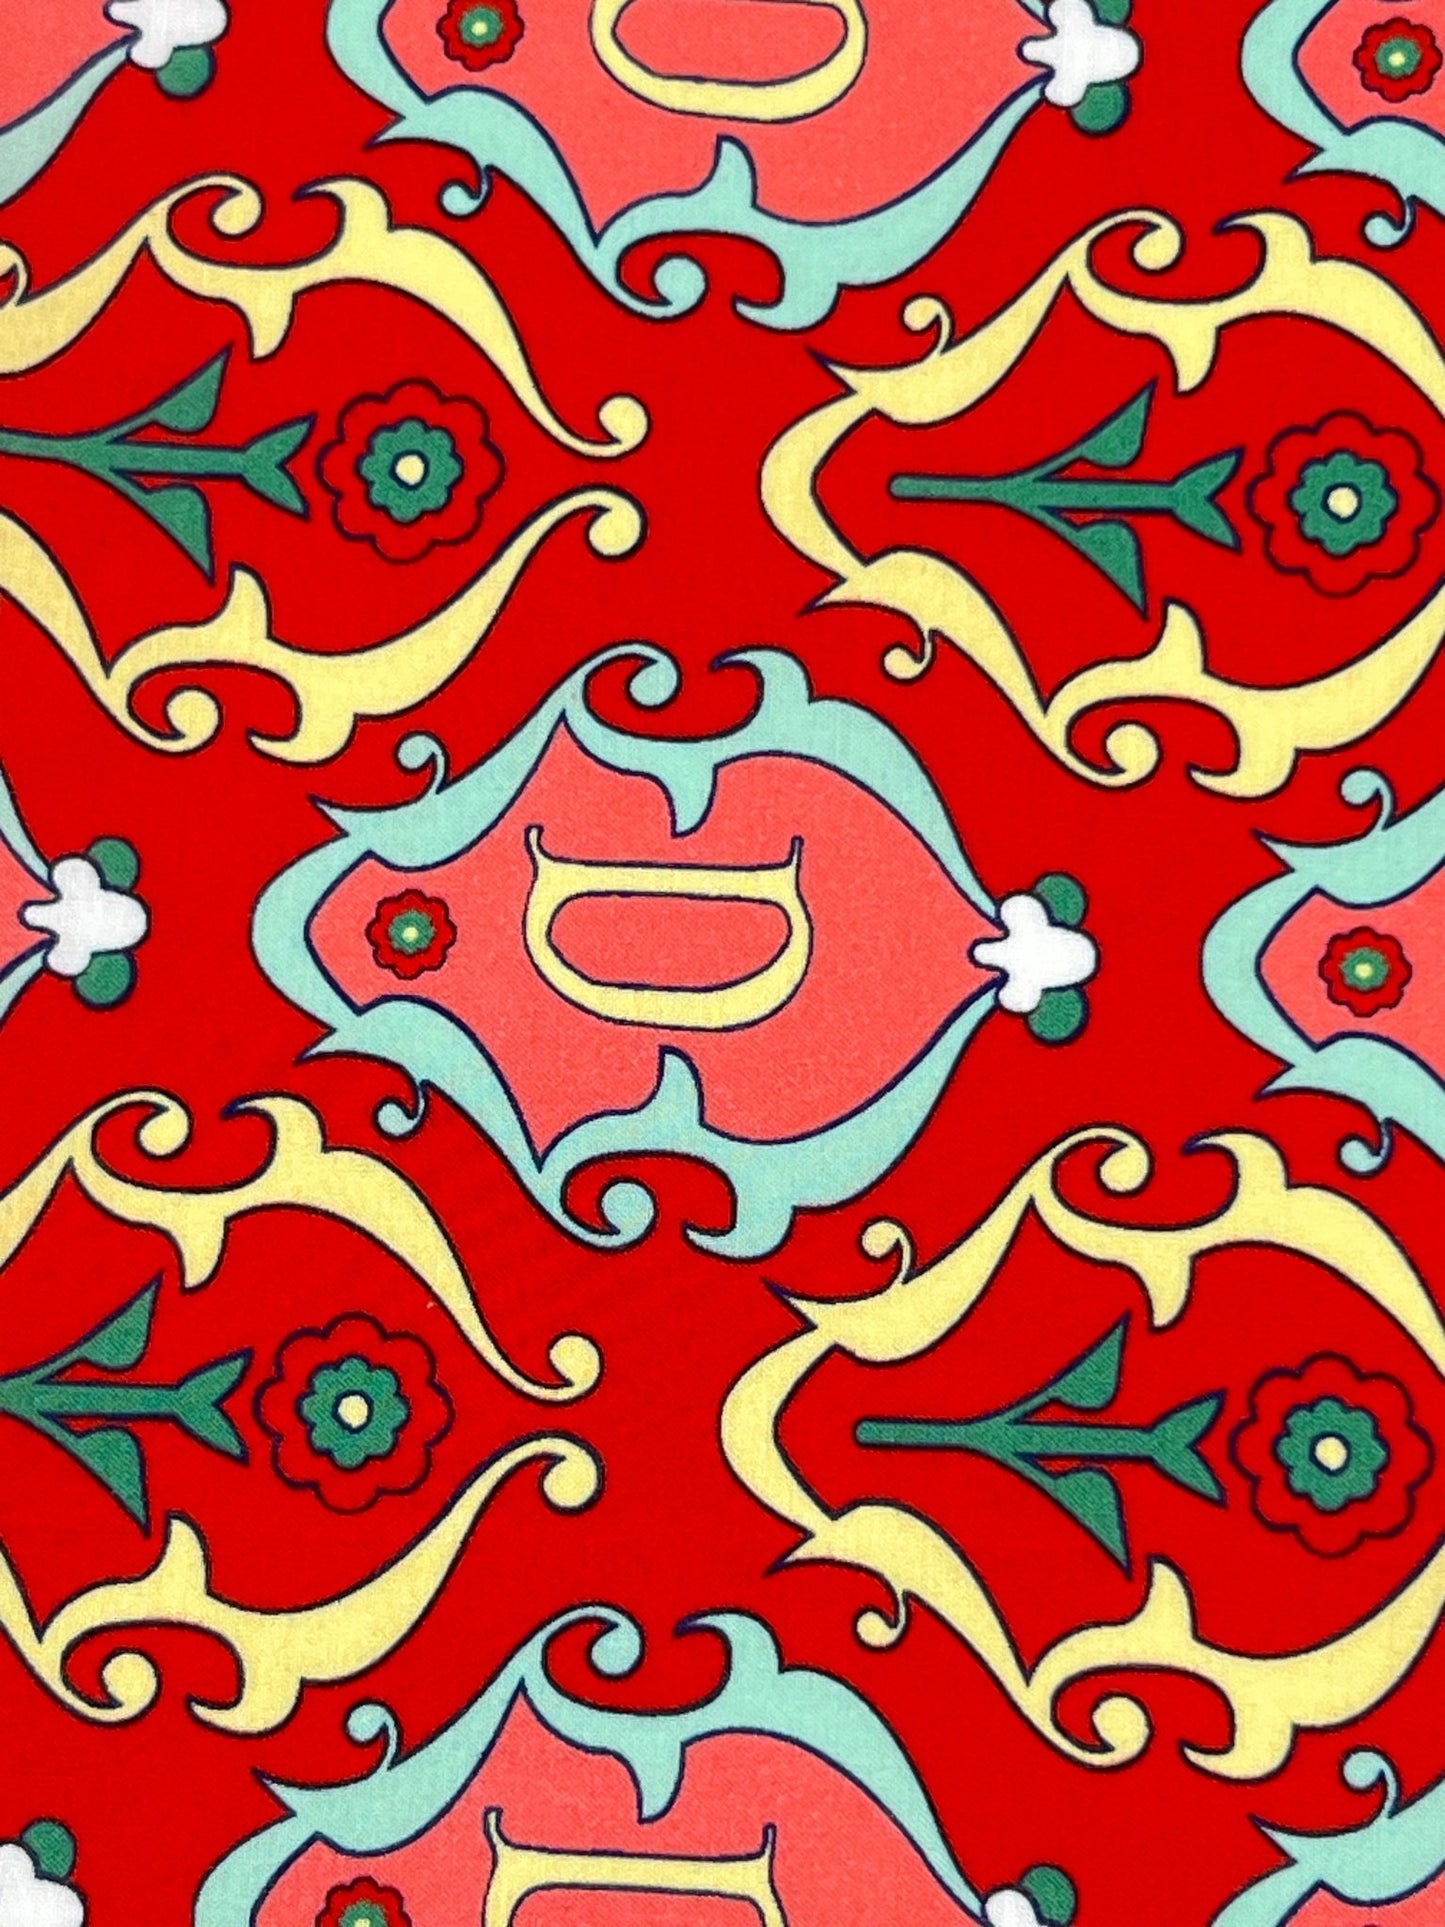 Colorful patterned DROLE DE MONSIEUR D-BA002-CO128-RD LE FOULARD ORNEMENTS scarf with floral and swirly designs on a red background.